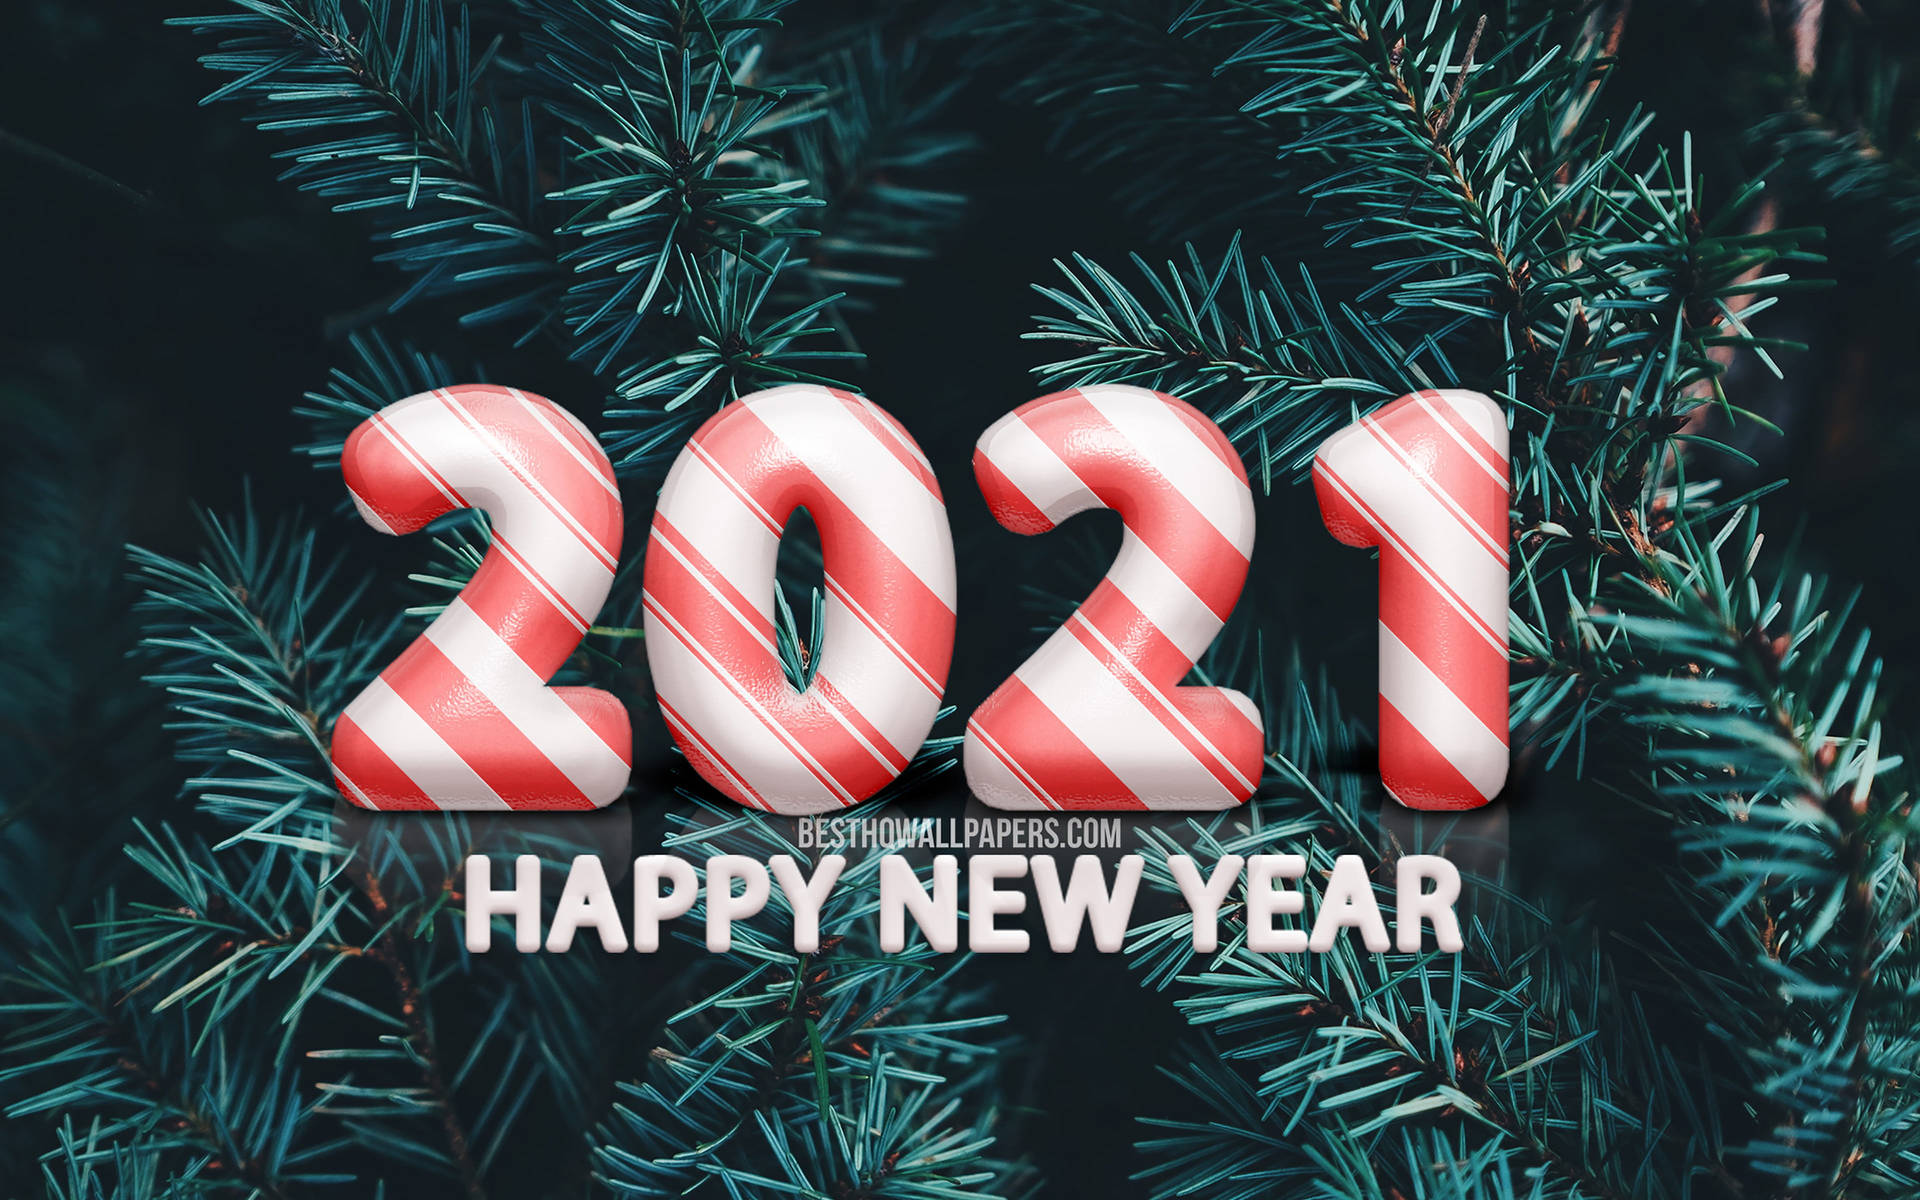 Happy New Year 2021 Candy Cane Inspired Background